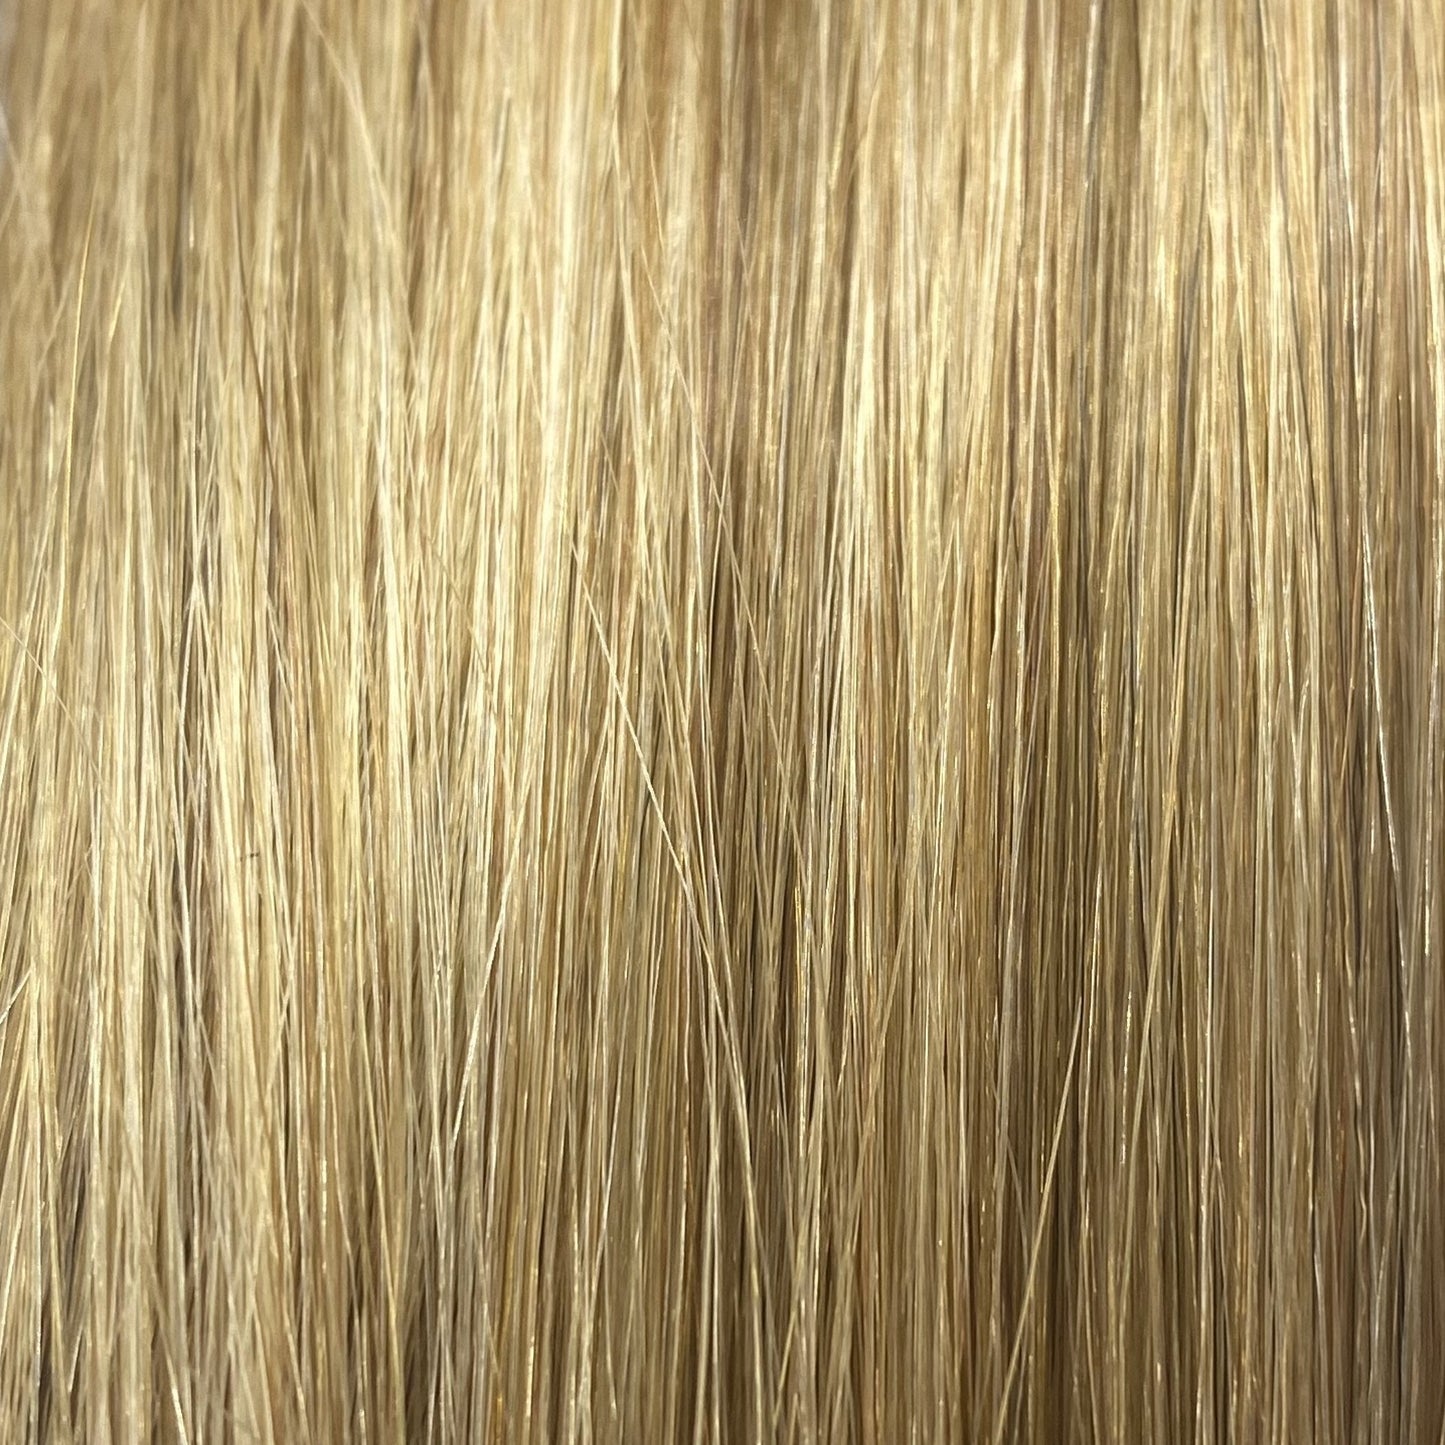 Fusion hair extensions #12/DB2 - 40cm/16 inches - Copper Golden Blonde/Light Golden Blonde Highlight Fusion Euro So Cap 